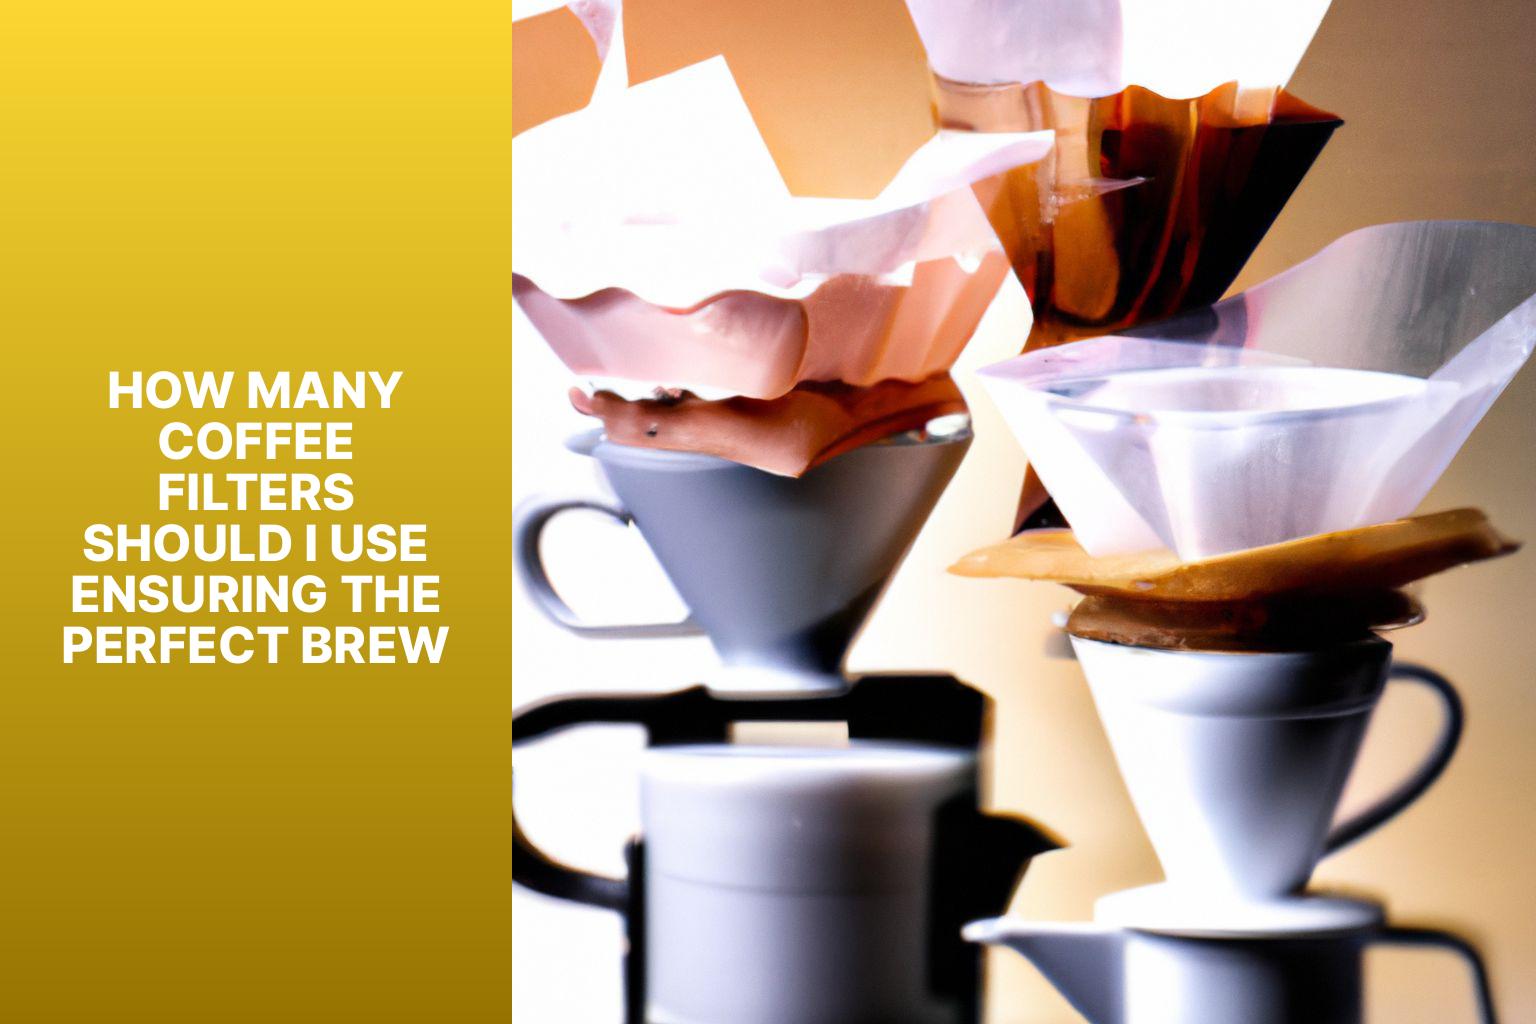 How Many Coffee Filters Should I Use? Ensuring the Perfect Brew